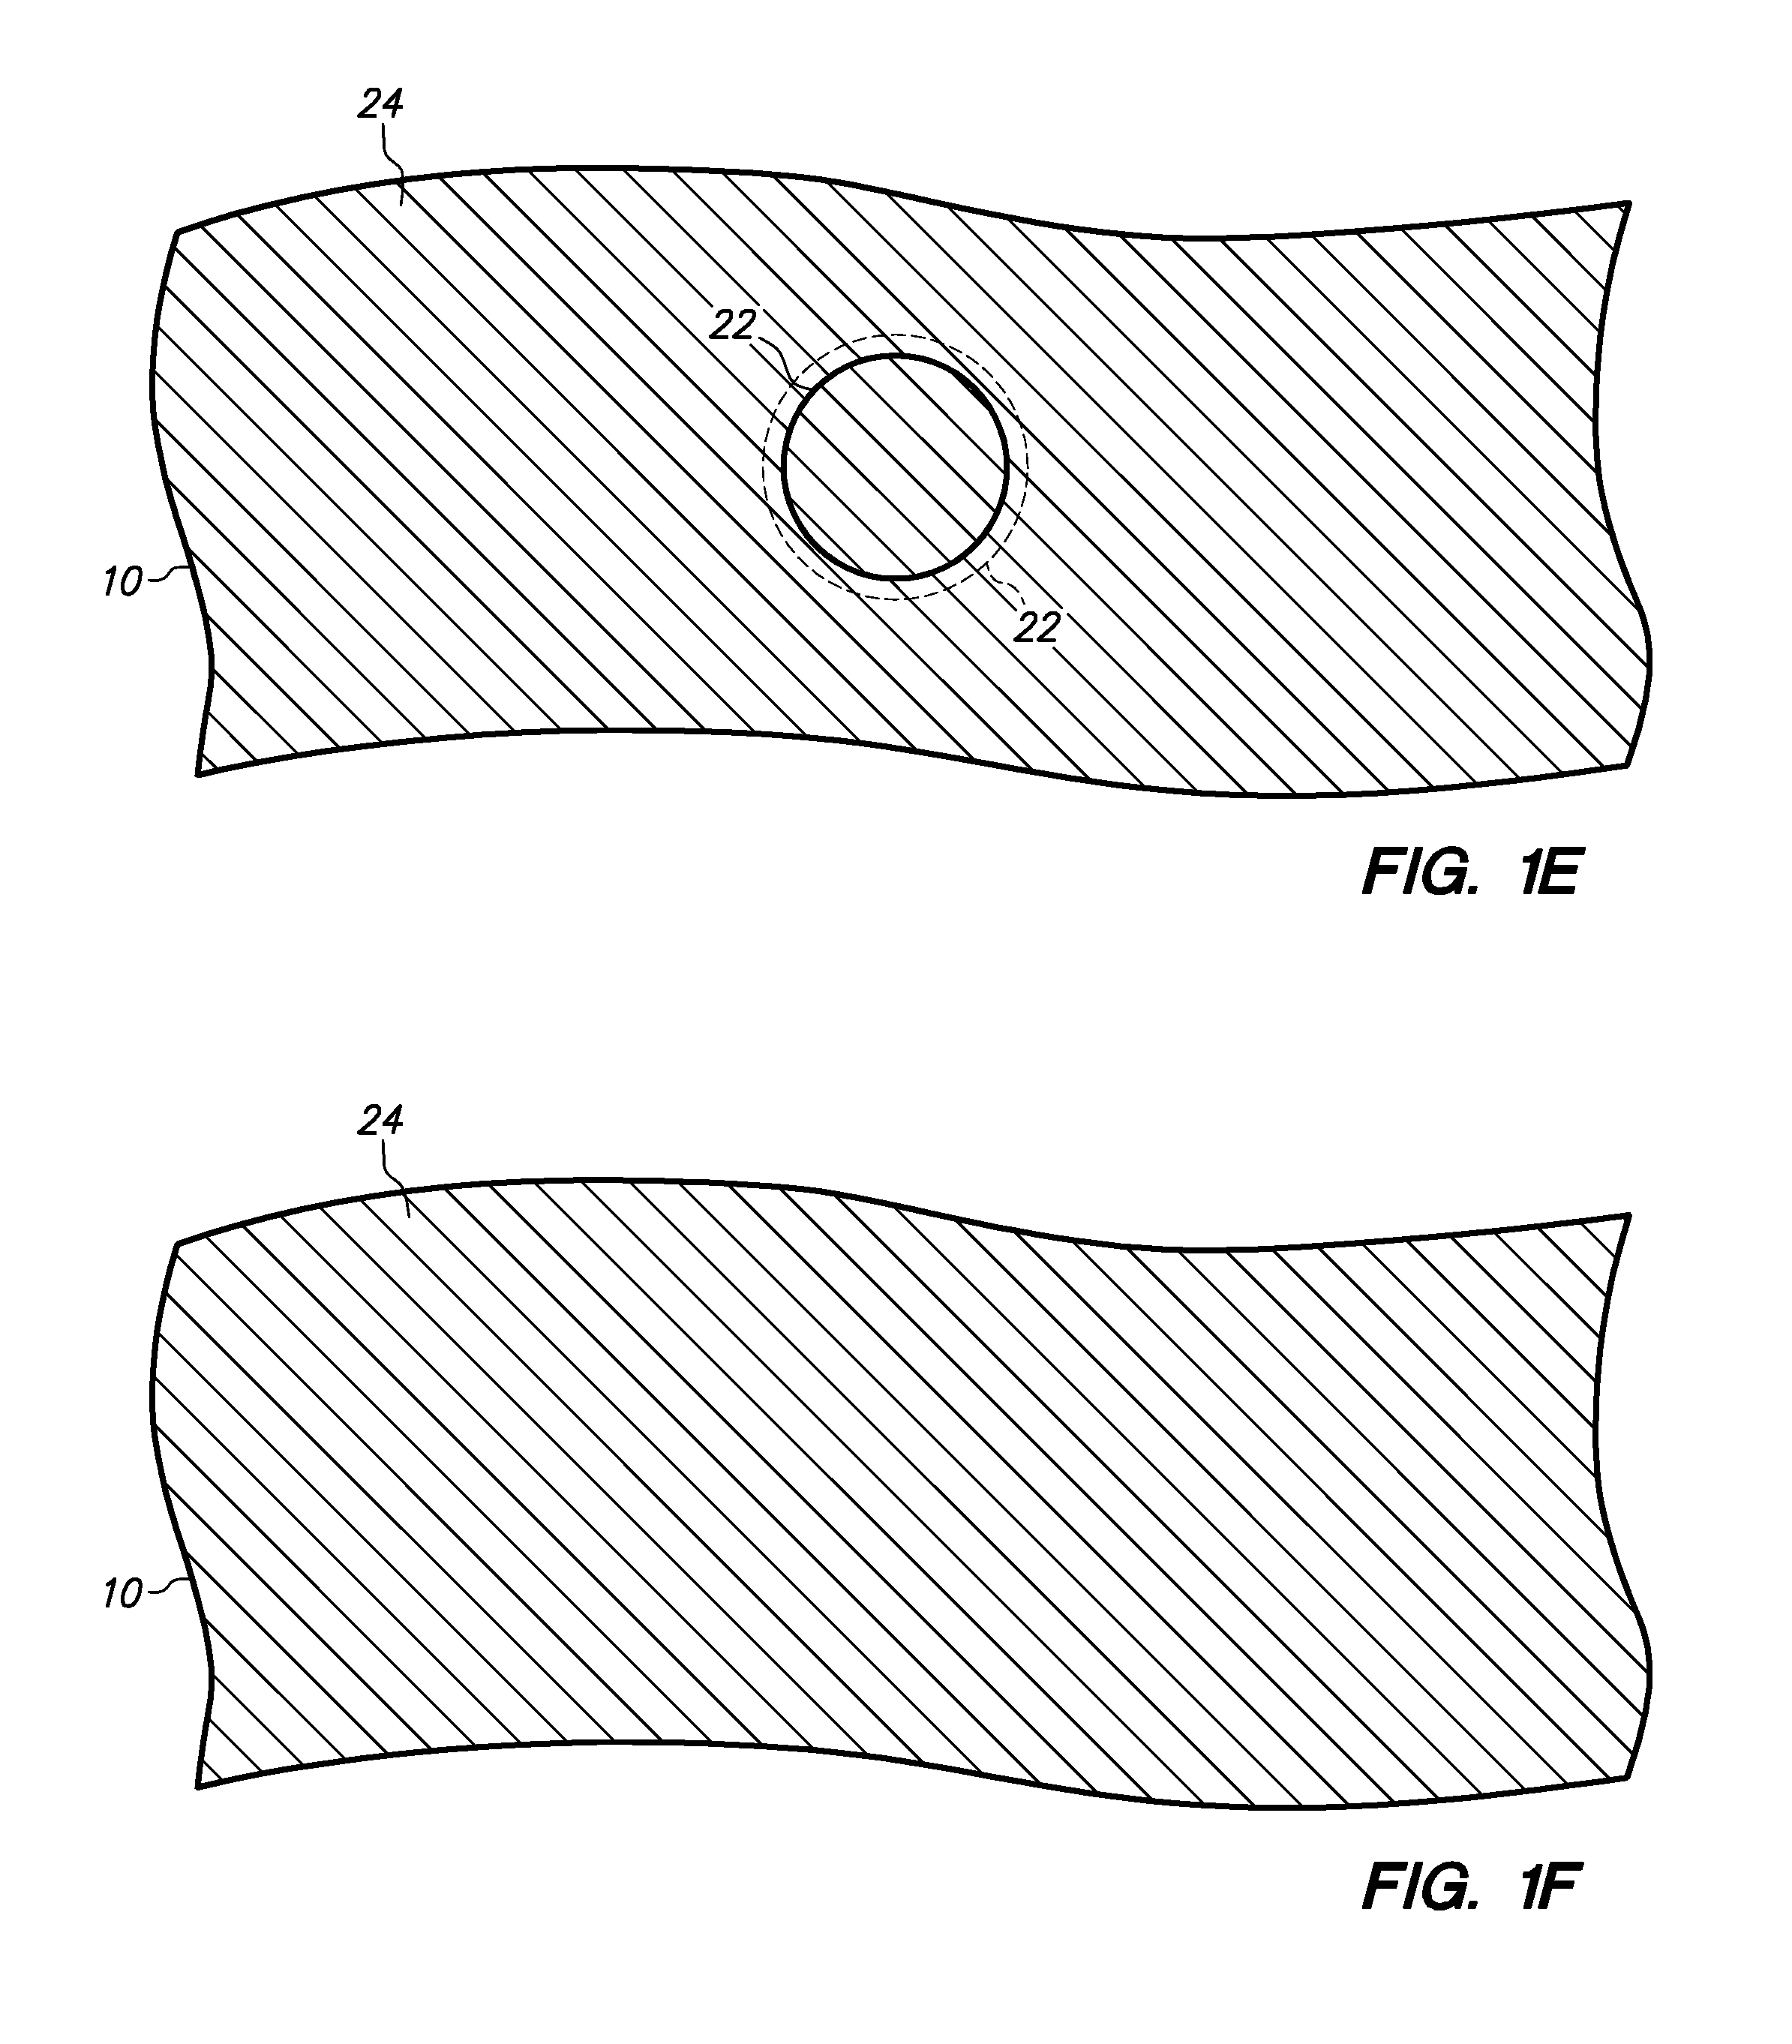 Method of making a semiconductor chip assembly with a post/base heat spreader and a cavity over the post